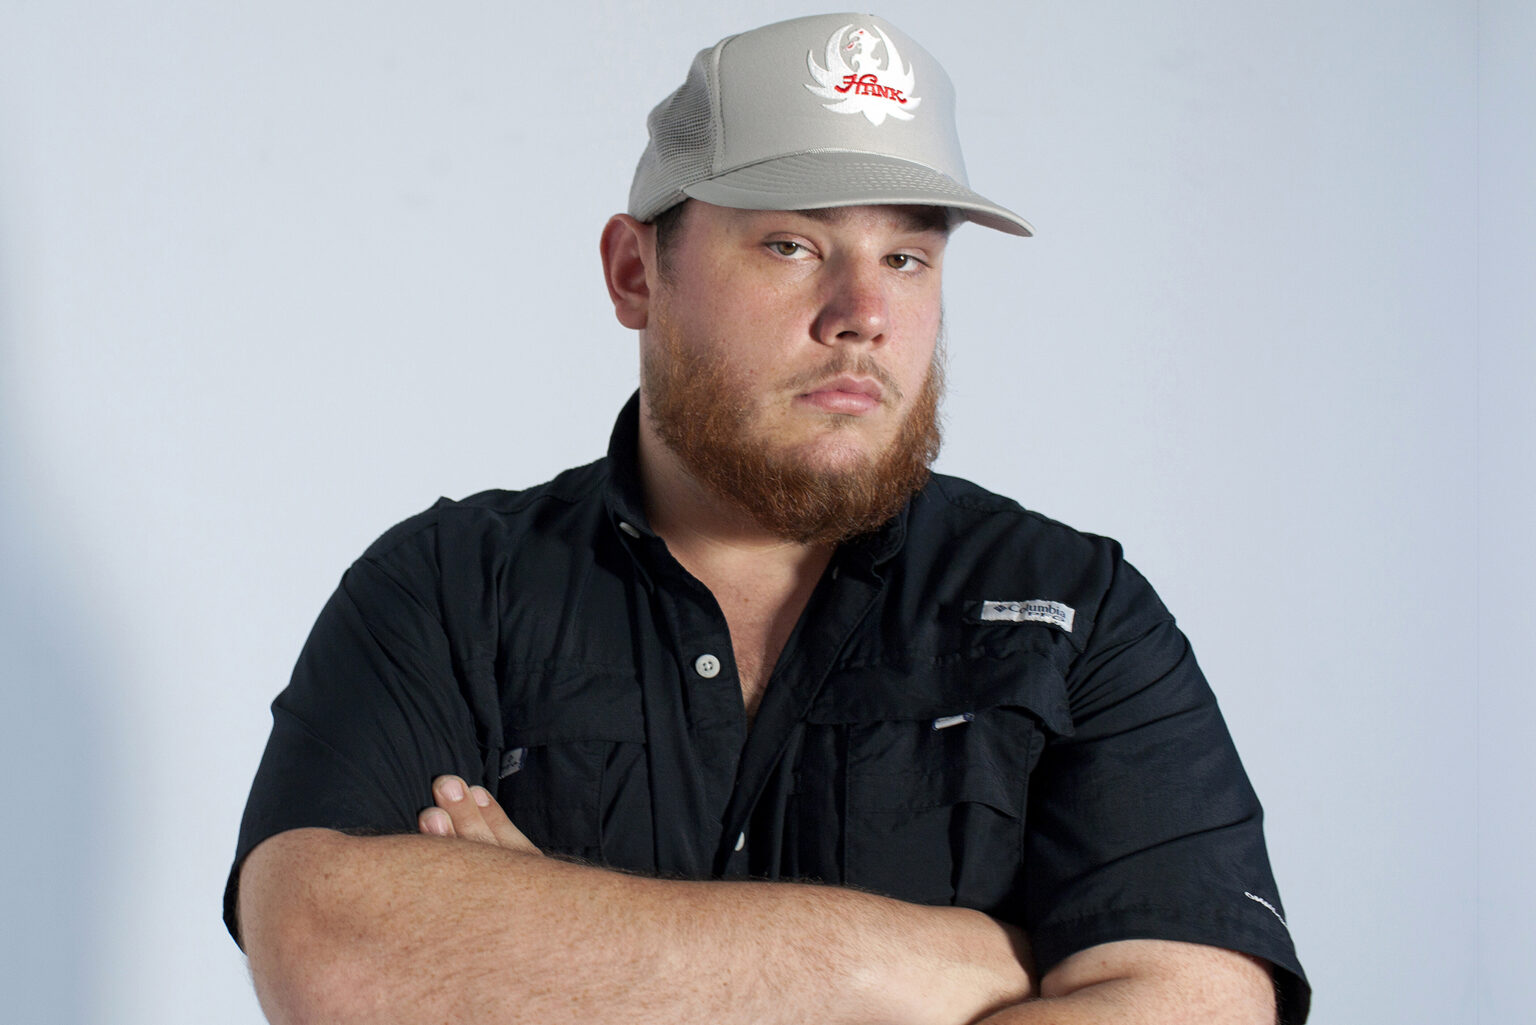 Find Luke Combs Tickets for many concert and tour dates. Find the best place to get tickets.